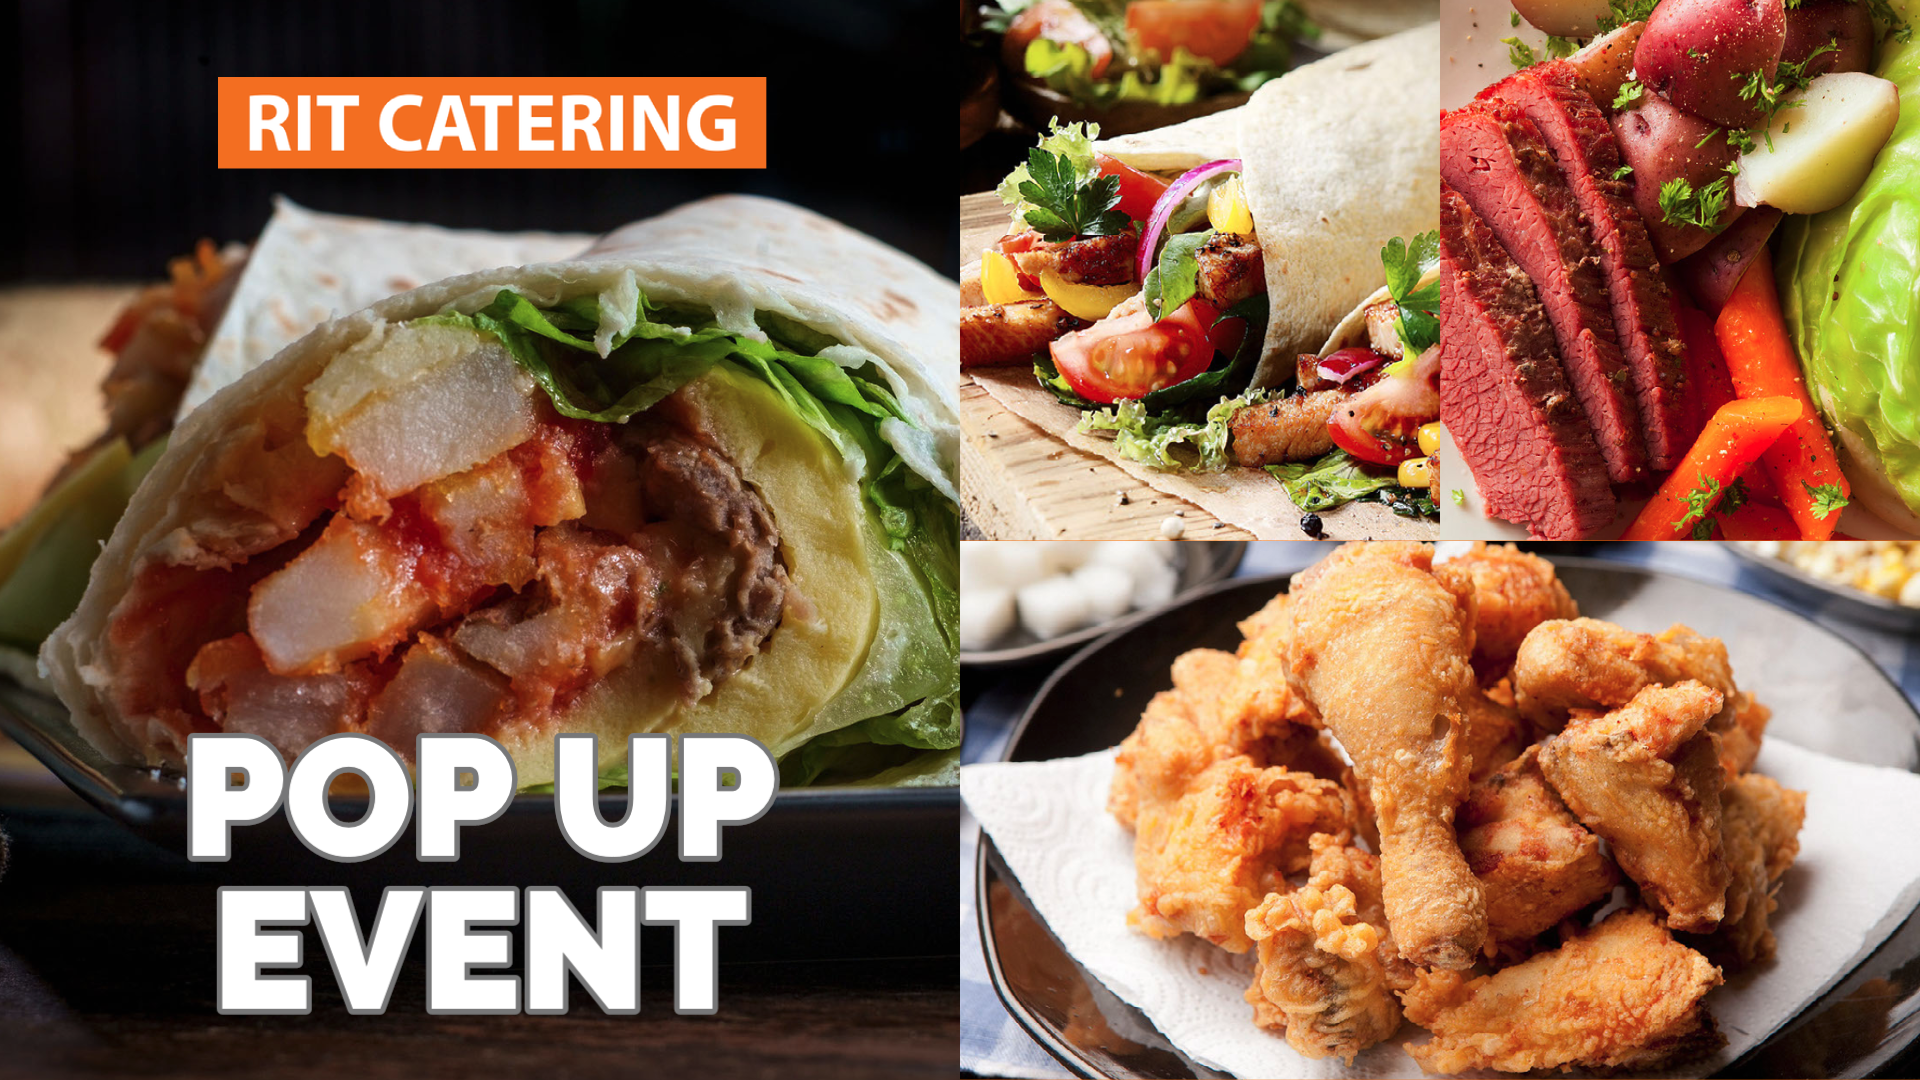 images of a chicken wrap, chicken wings, and corned beef with the RIT Catering logo and "Pop Up Event"